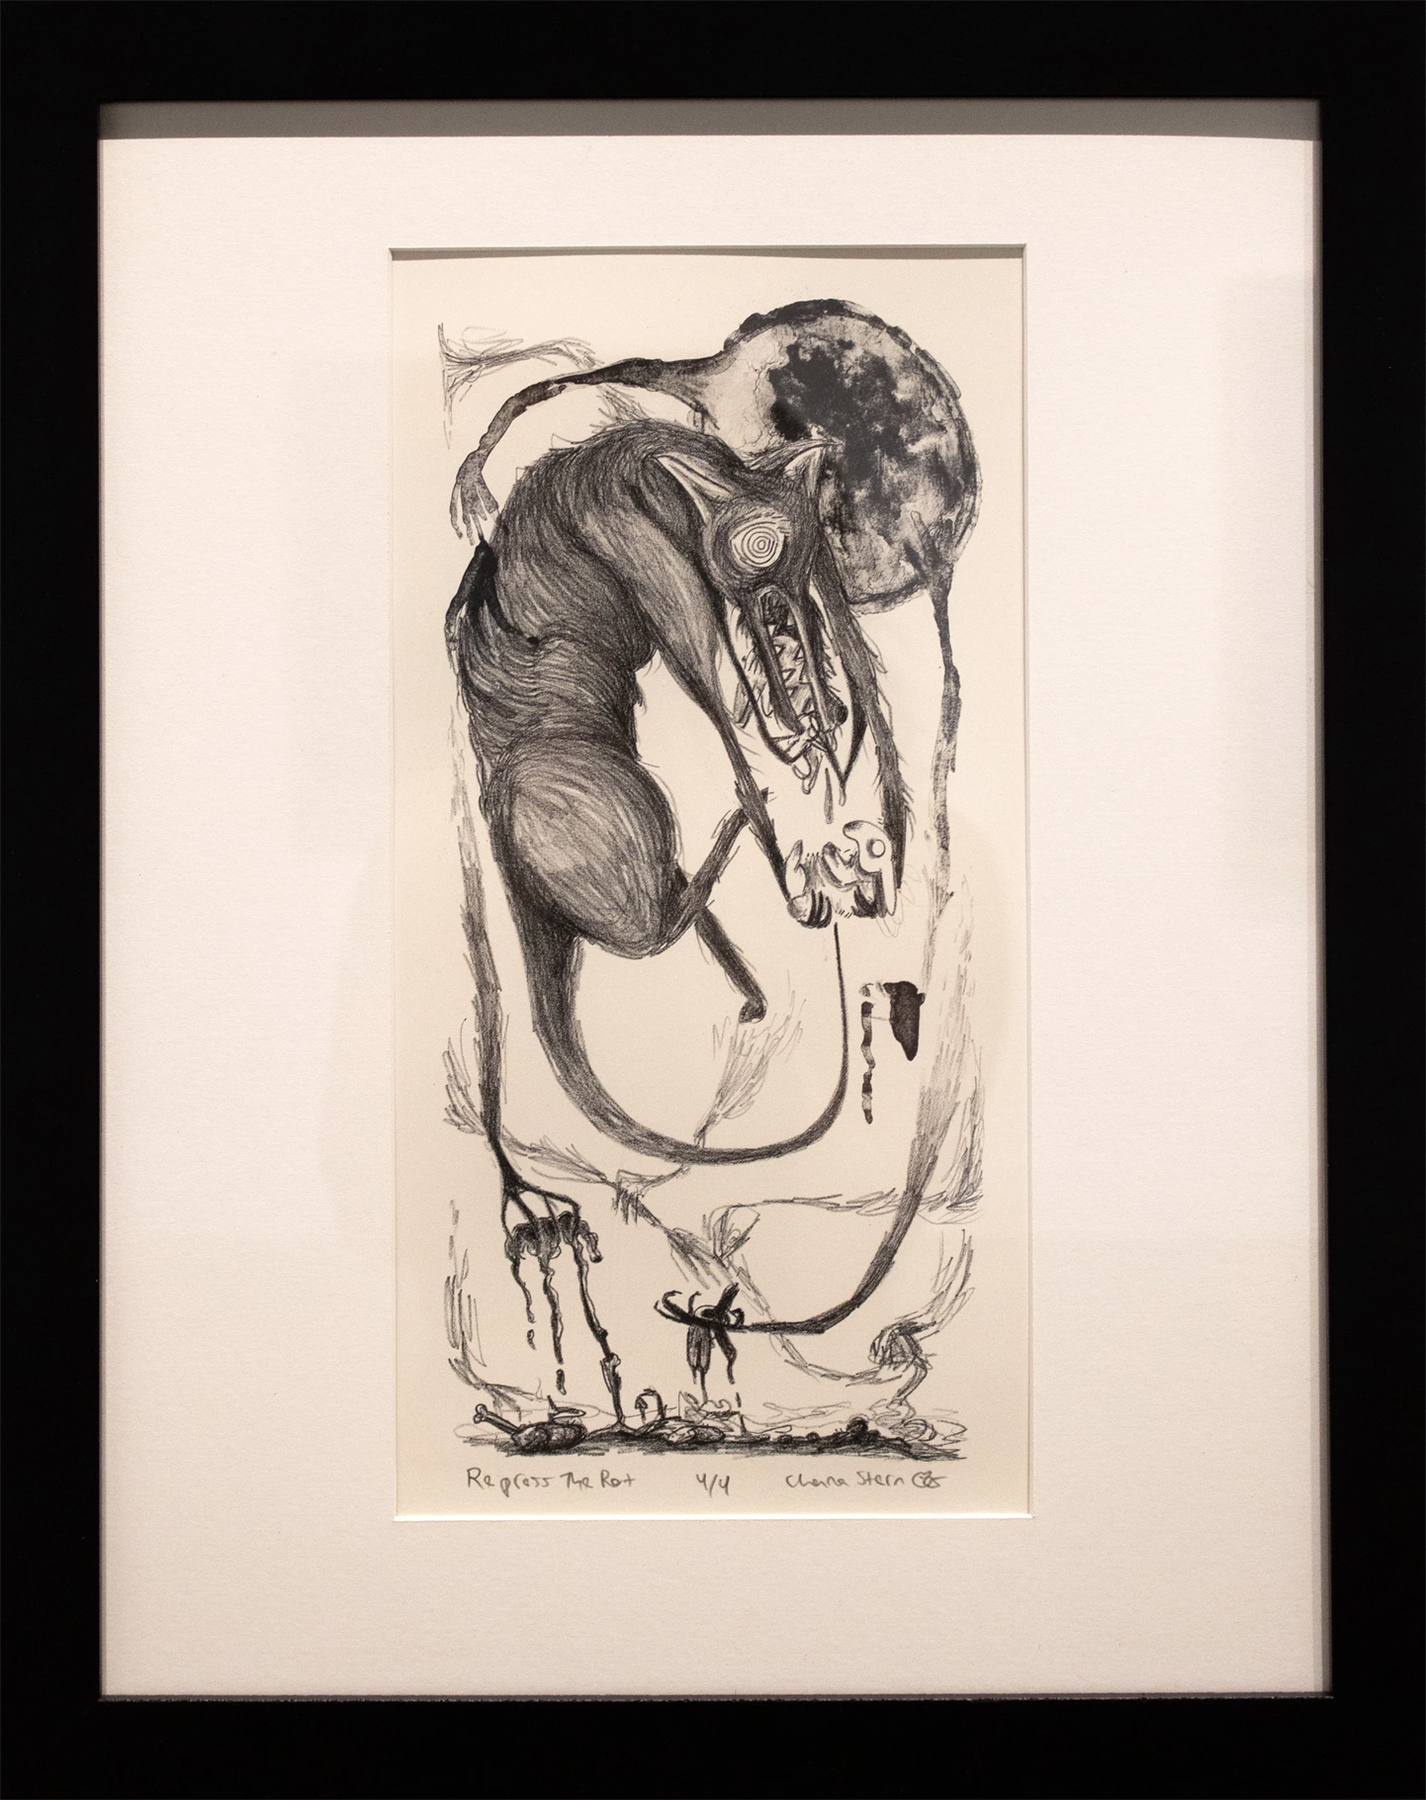 Black and white framed lithograph of a decaying animal holding a smaller animal, courtesy of the artist